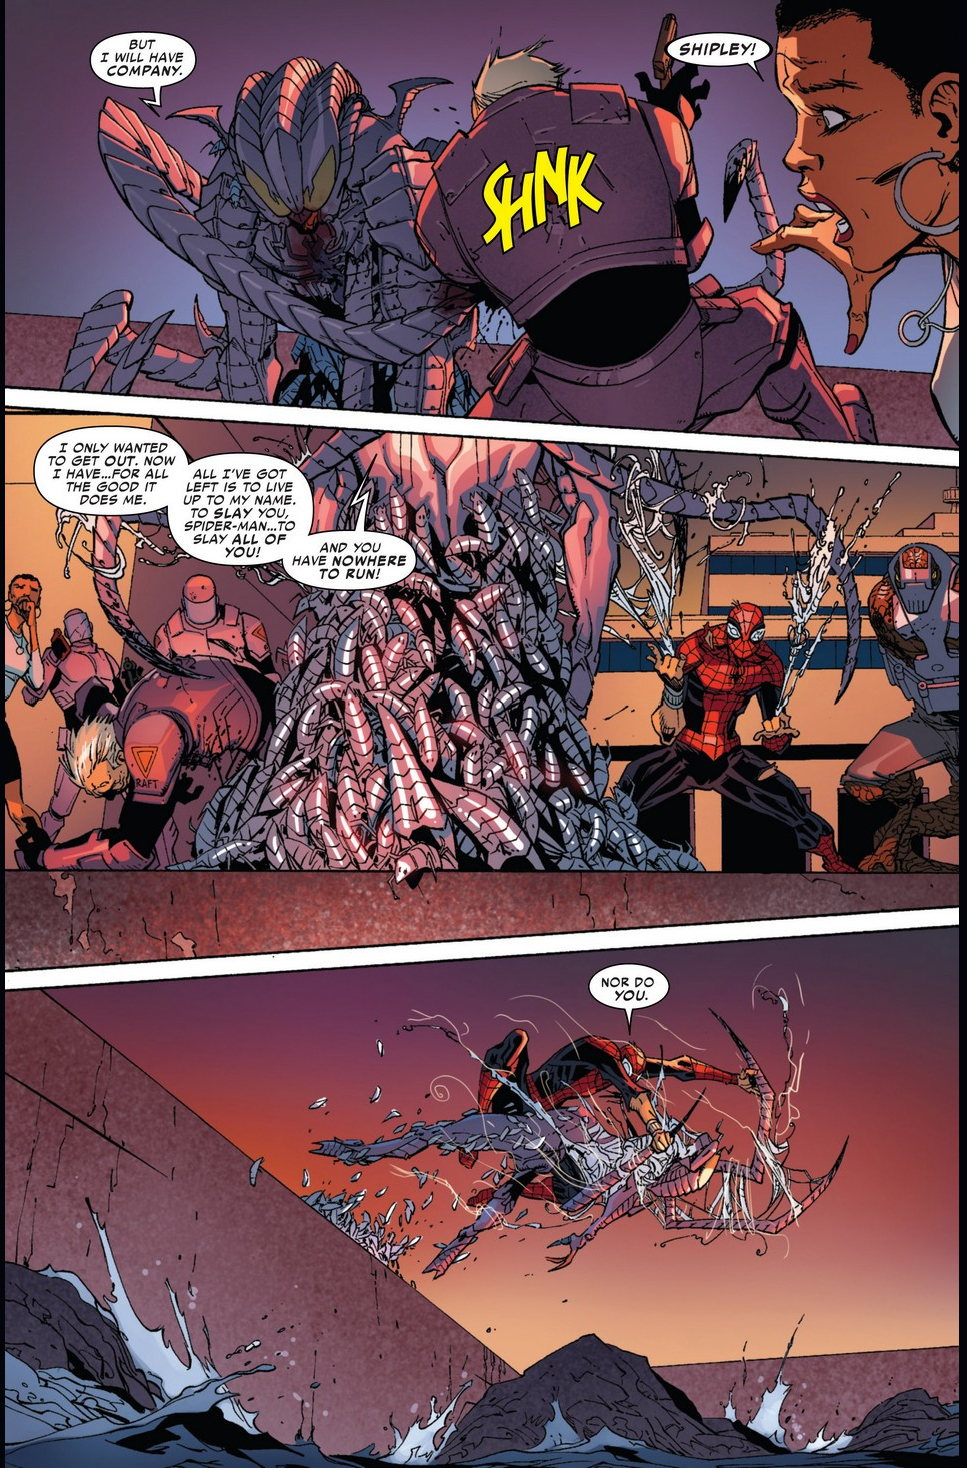 the spider-slayer tries to steal superior spider-man's body